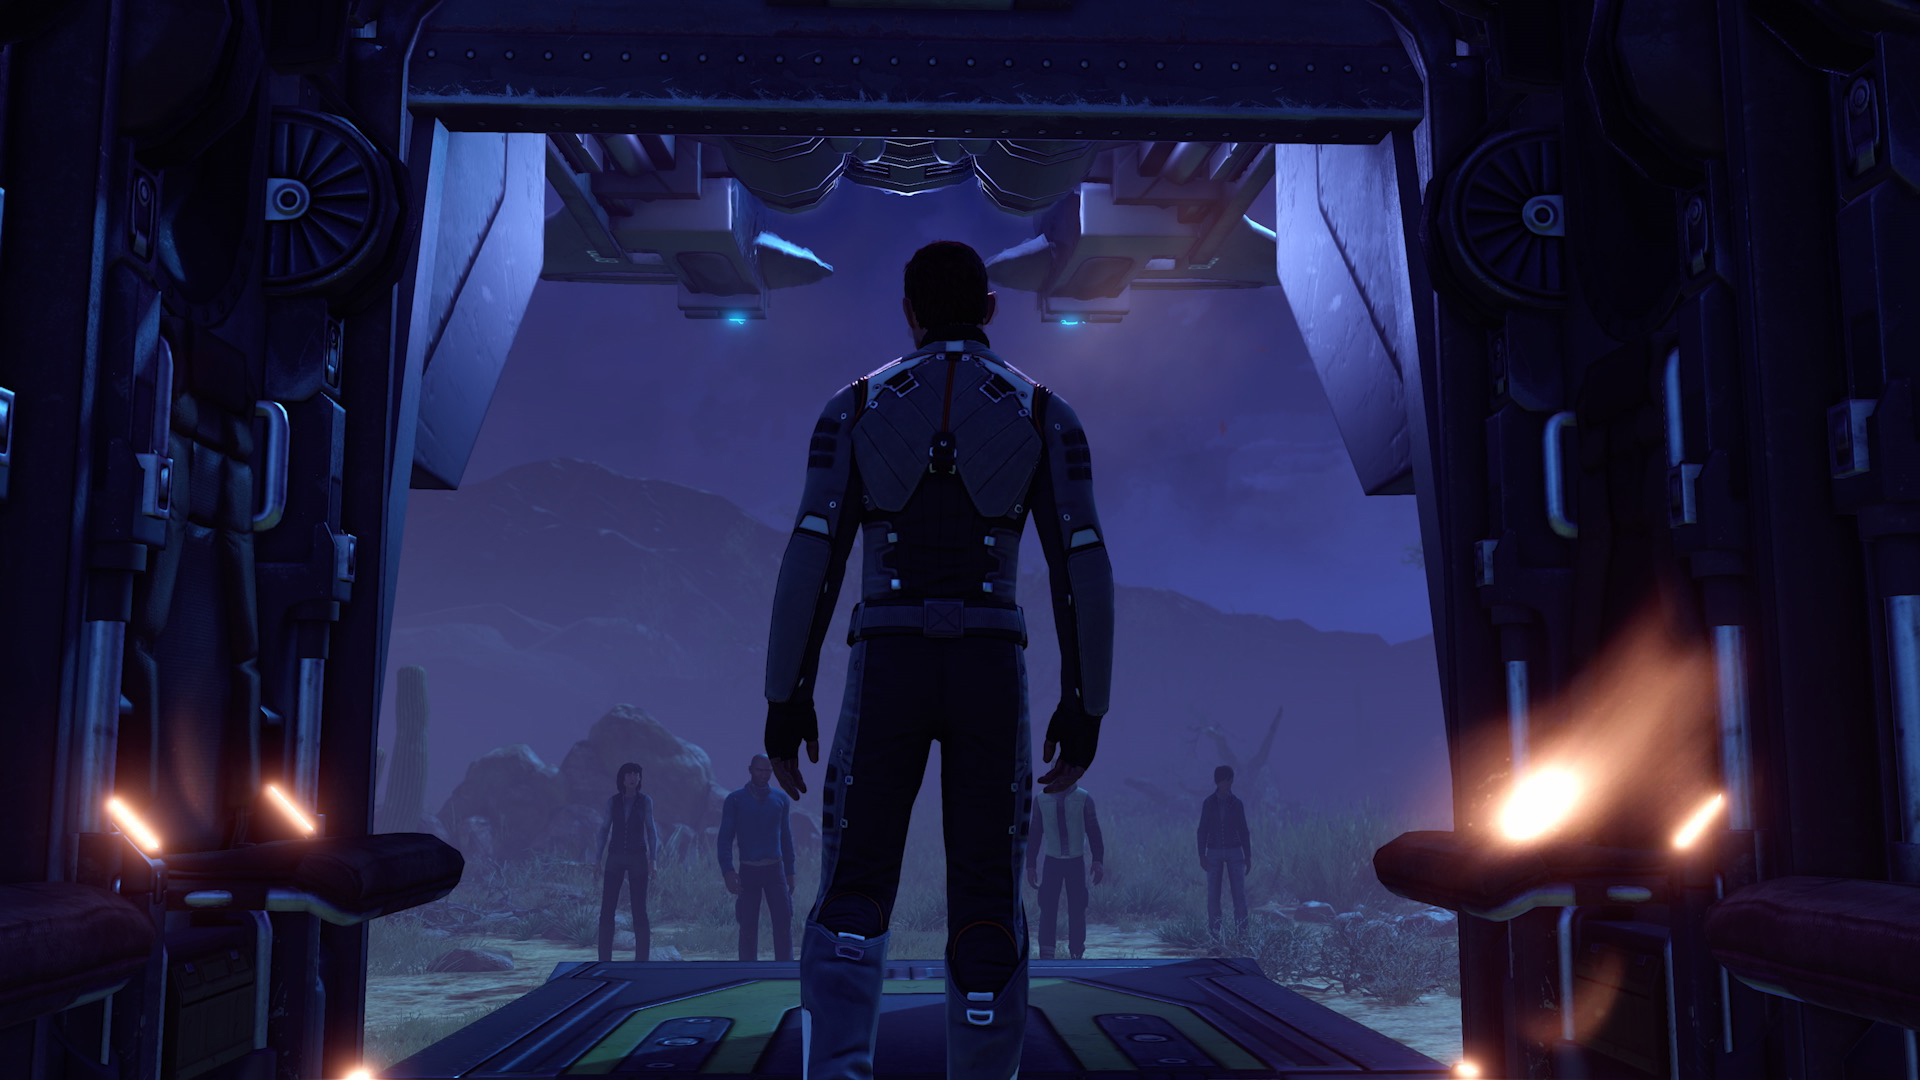 Lands Divided may not Stand High - A X-Com Survival Strategy Game